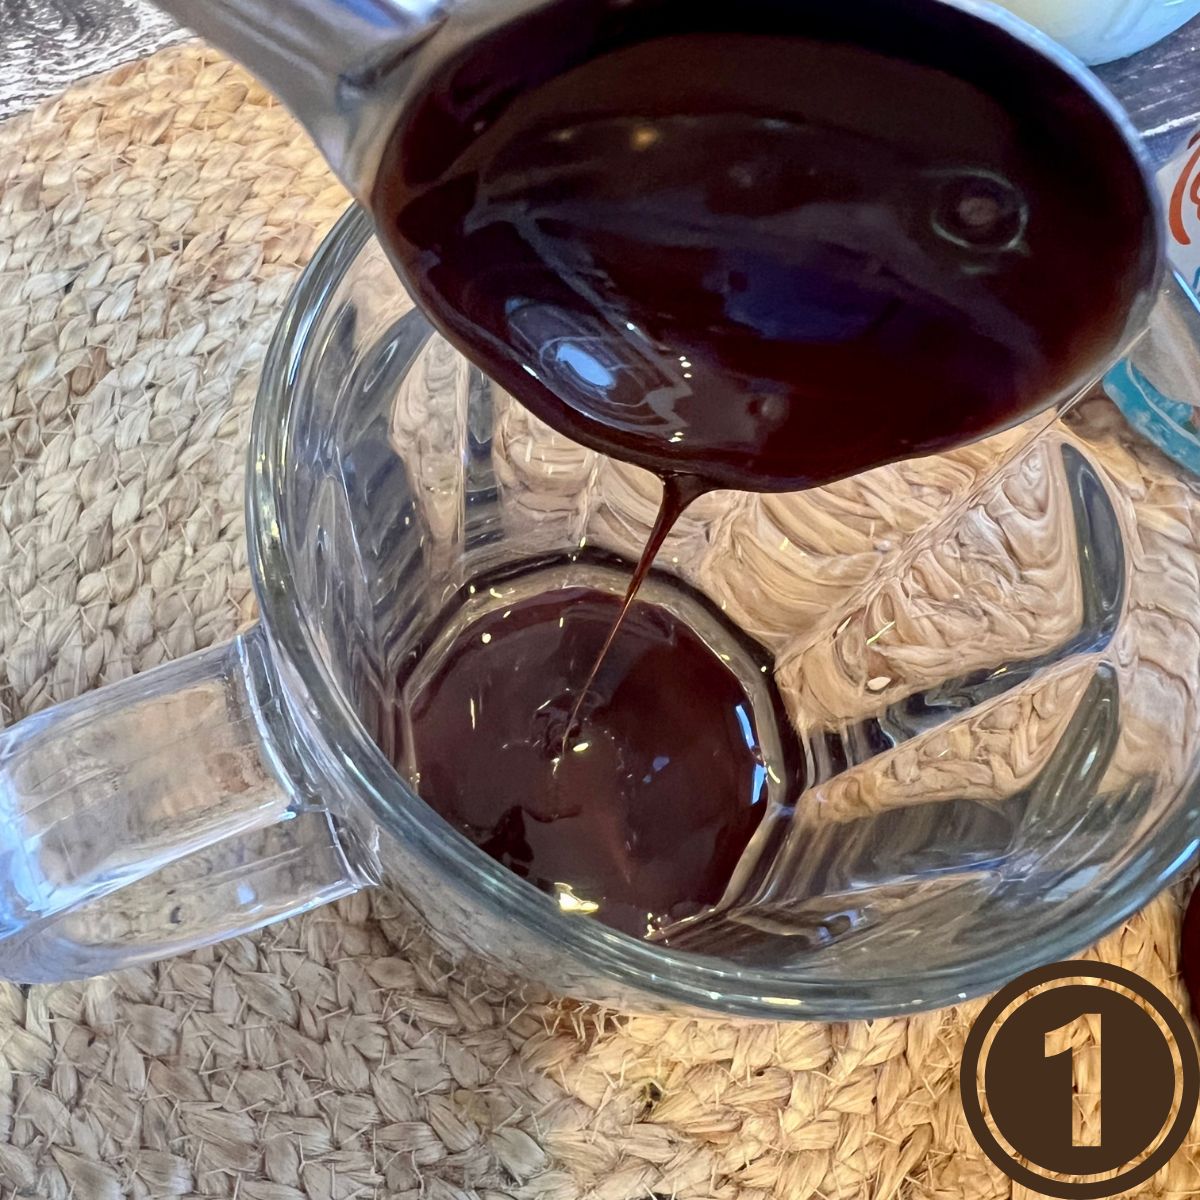 A spoon pouring chocolate syrup into a glass